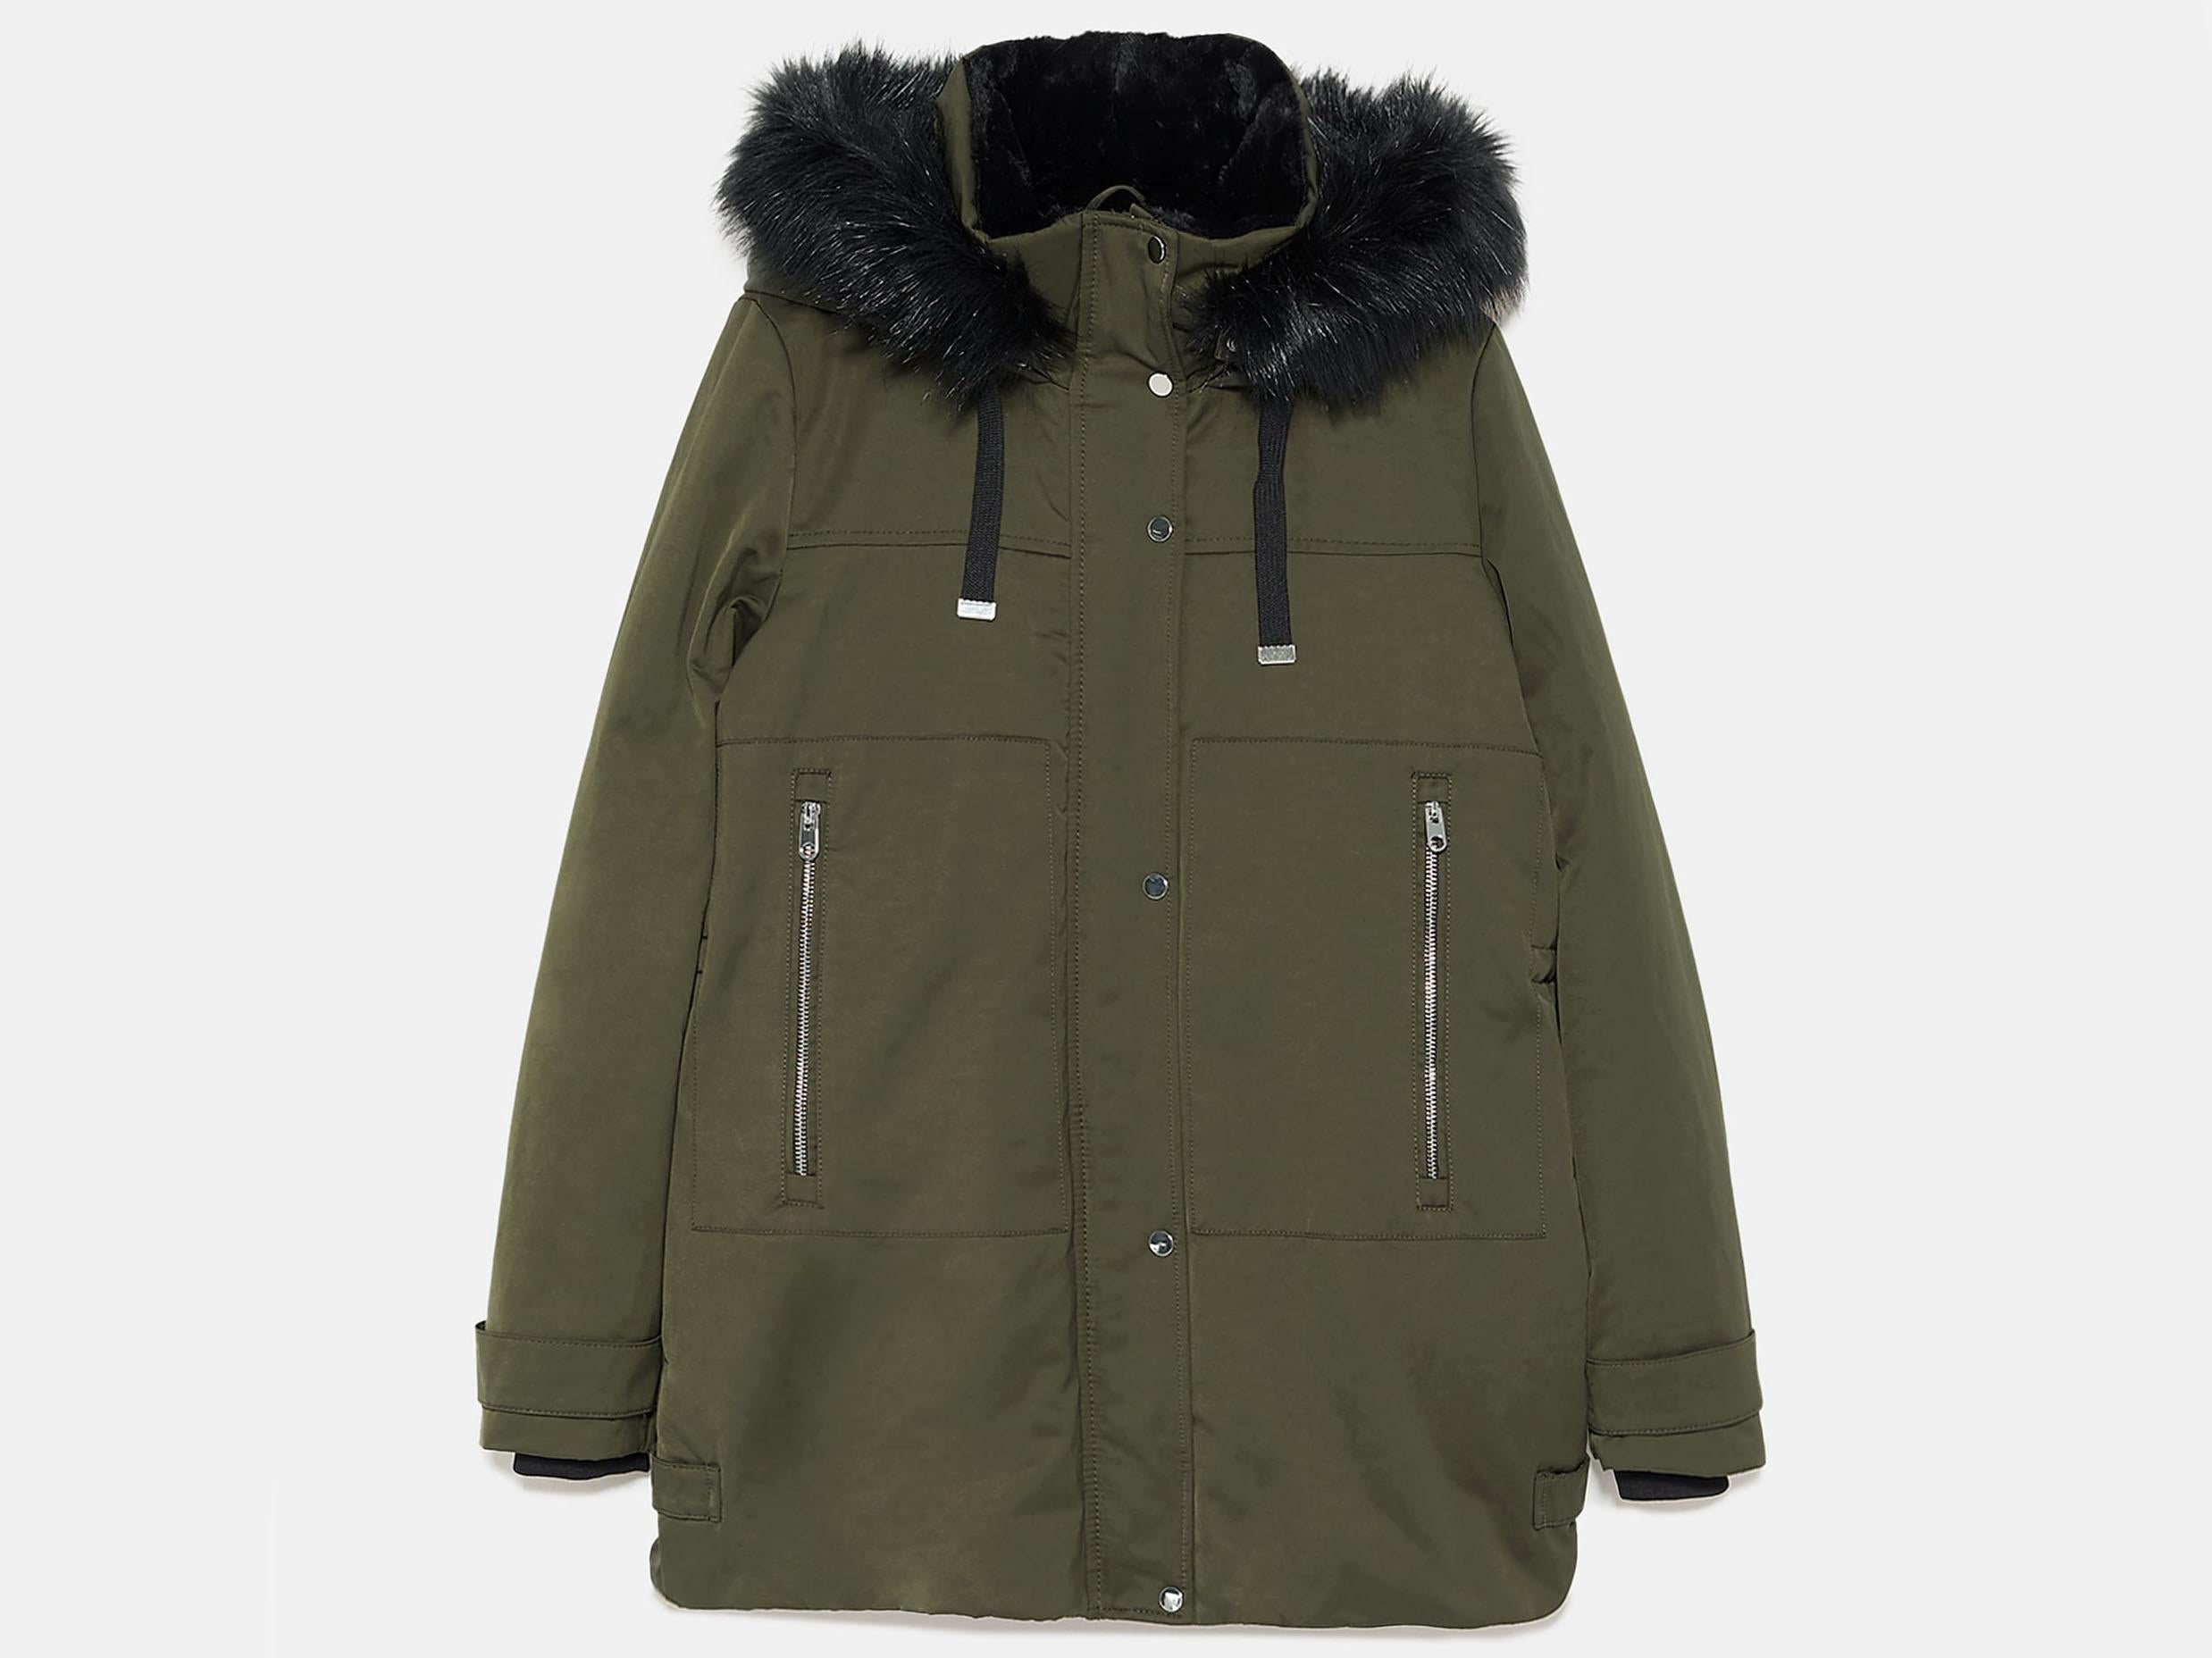 Quilted Water-Resistant Parka with Hood, £89.99, Zara